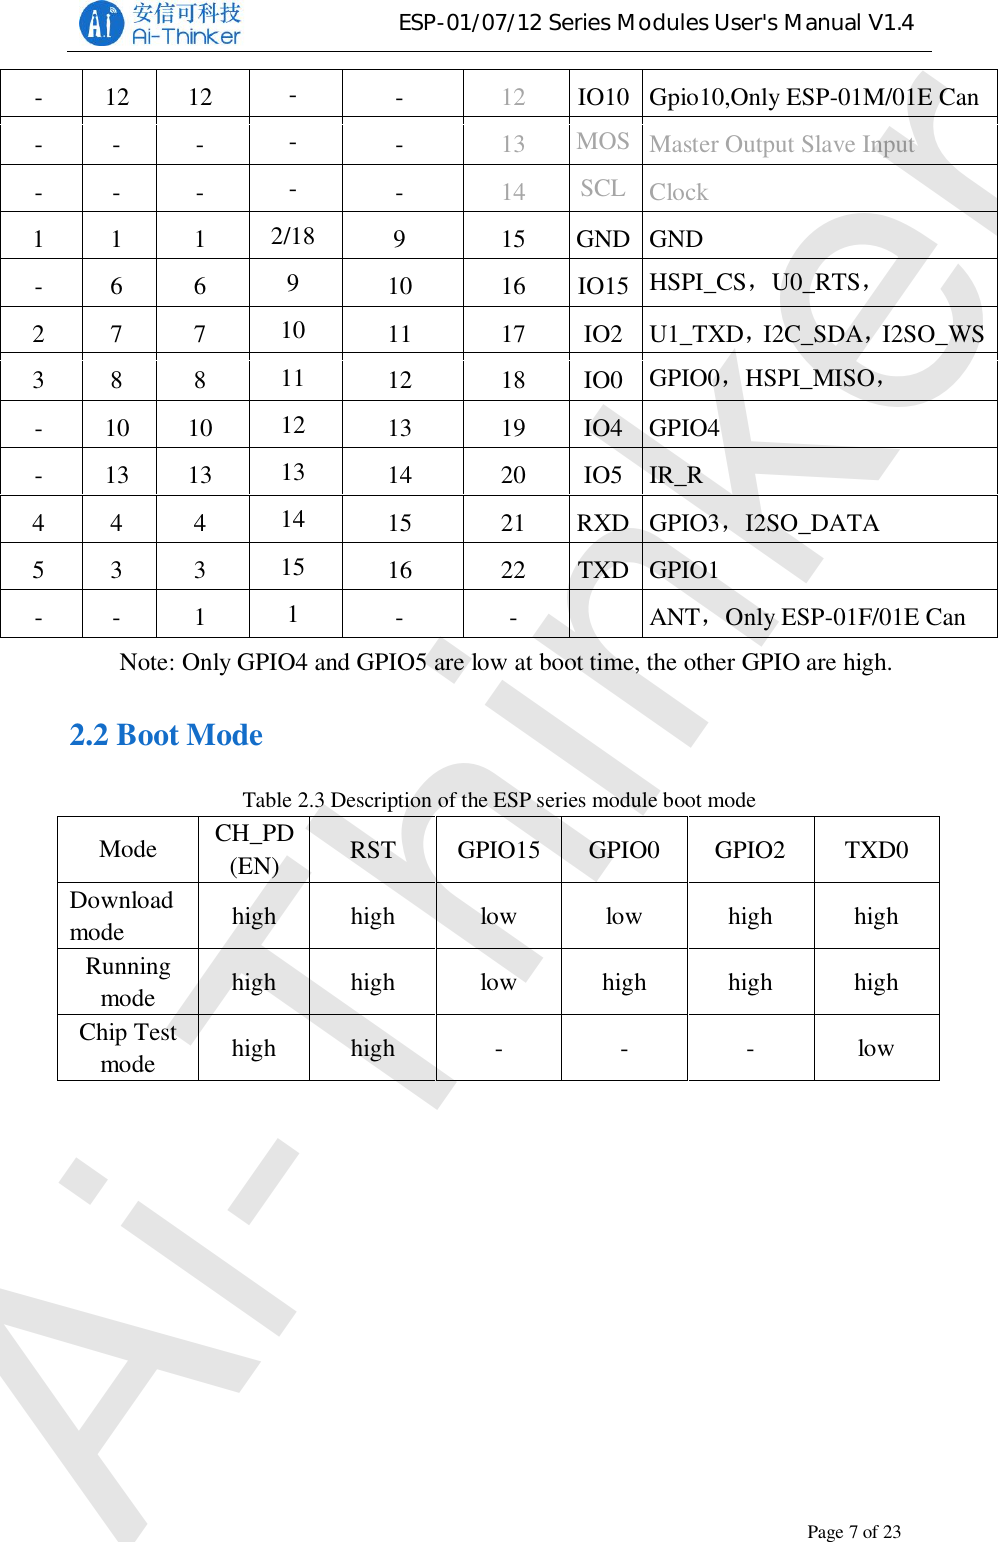 ESP-01/07/12 Series Modules User&apos;s Manual V1.4Copyright © 2017 Shenzhen Ai-Thinker Technology Co., Ltd All Rights ReservedPage7of23-12 12 --12 IO10 Gpio10,Only ESP-01M/01E Can- - - --13 MOSIMaster Output Slave Input- - - --14 SCLKClock1 1 1 2/18 915 GND GND- 6 6 910 16 IO15 HSPI_CSU0_RTSI2SO_BCK2 7 7 10 11 17 IO2 U1_TXDI2C_SDAI2SO_WS3 8 8 11 12 18 IO0 GPIO0HSPI_MISOI2SI_DATA-10 10 12 13 19 IO4 GPIO4-13 13 13 14 20 IO5 IR_R4 4 4 14 15 21 RXD GPIO3I2SO_DATA5 3 3 15 16 22 TXD GPIO1- - 1 1- -  ANTOnly ESP-01F/01E CanNote: Only GPIO4 and GPIO5 are low at boot time, the other GPIO are high.2.2 Boot ModeTable 2.3 Description of the ESP series module boot modeMode CH_PD(EN) RST GPIO15 GPIO0 GPIO2 TXD0Downloadmode high high low low high highRunningmode high high low high high highChip Testmode high high - - - lowAi-Thinker